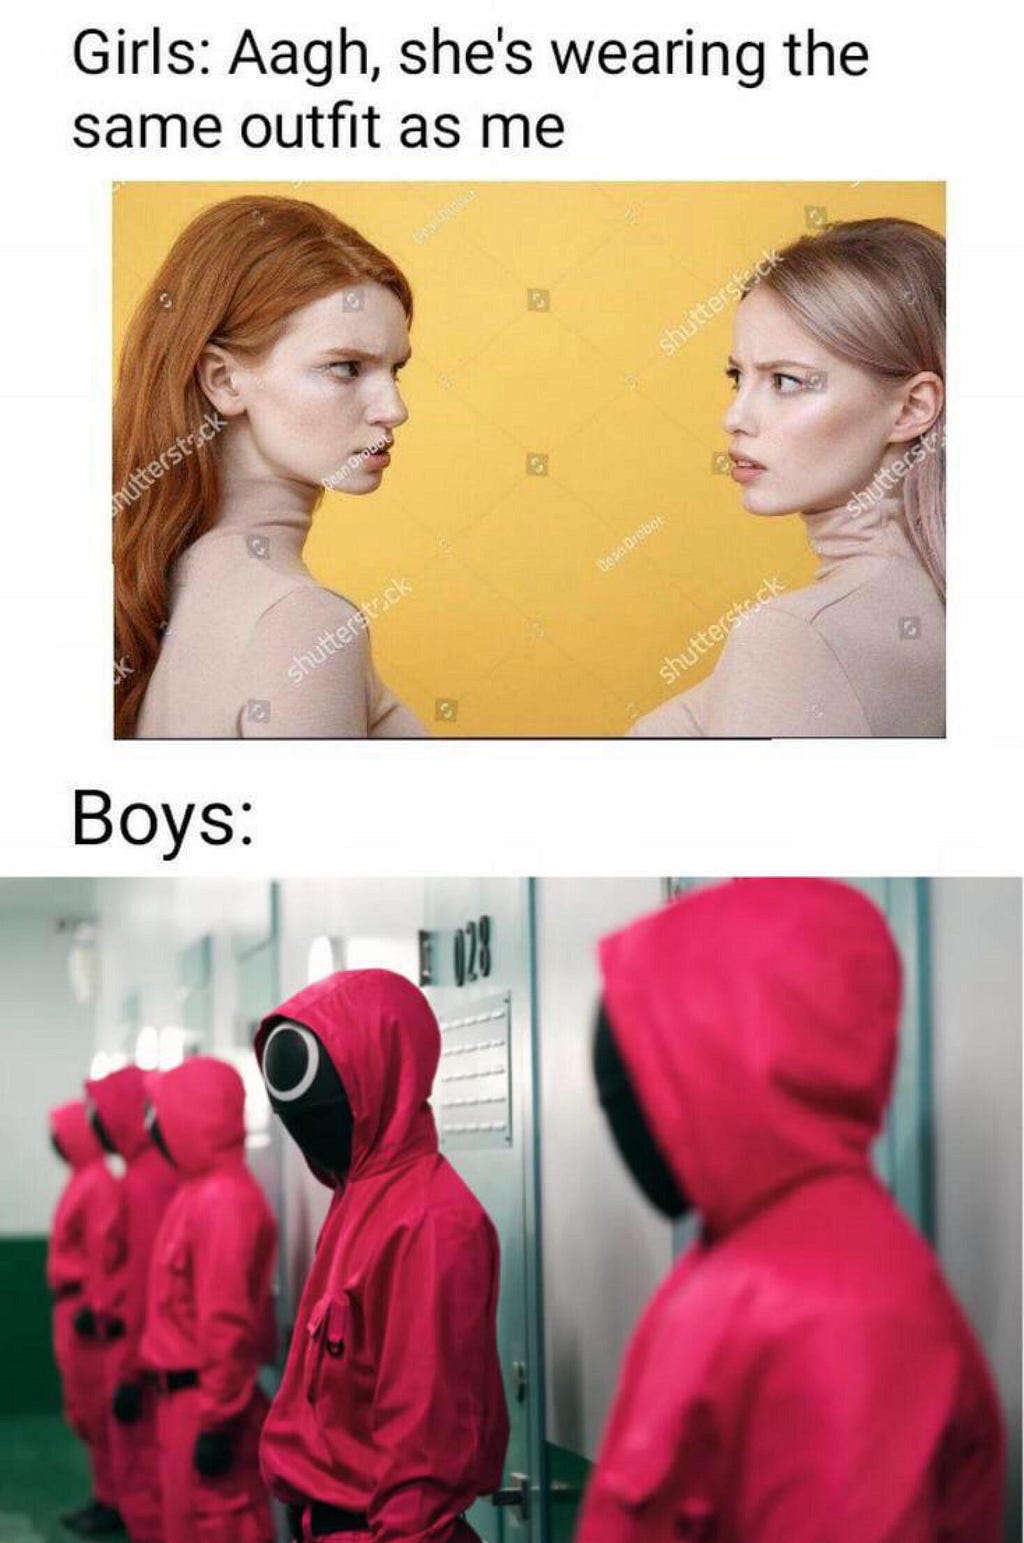 a meme showing (at the top) with a caption saying “Girls:” and two women grimacing at each other because they’re both wearing the same outfit juxtaposed against another picture (at the bottom) with a caption saying “Boys:” and a of a bunch of people wearing the same outfit.